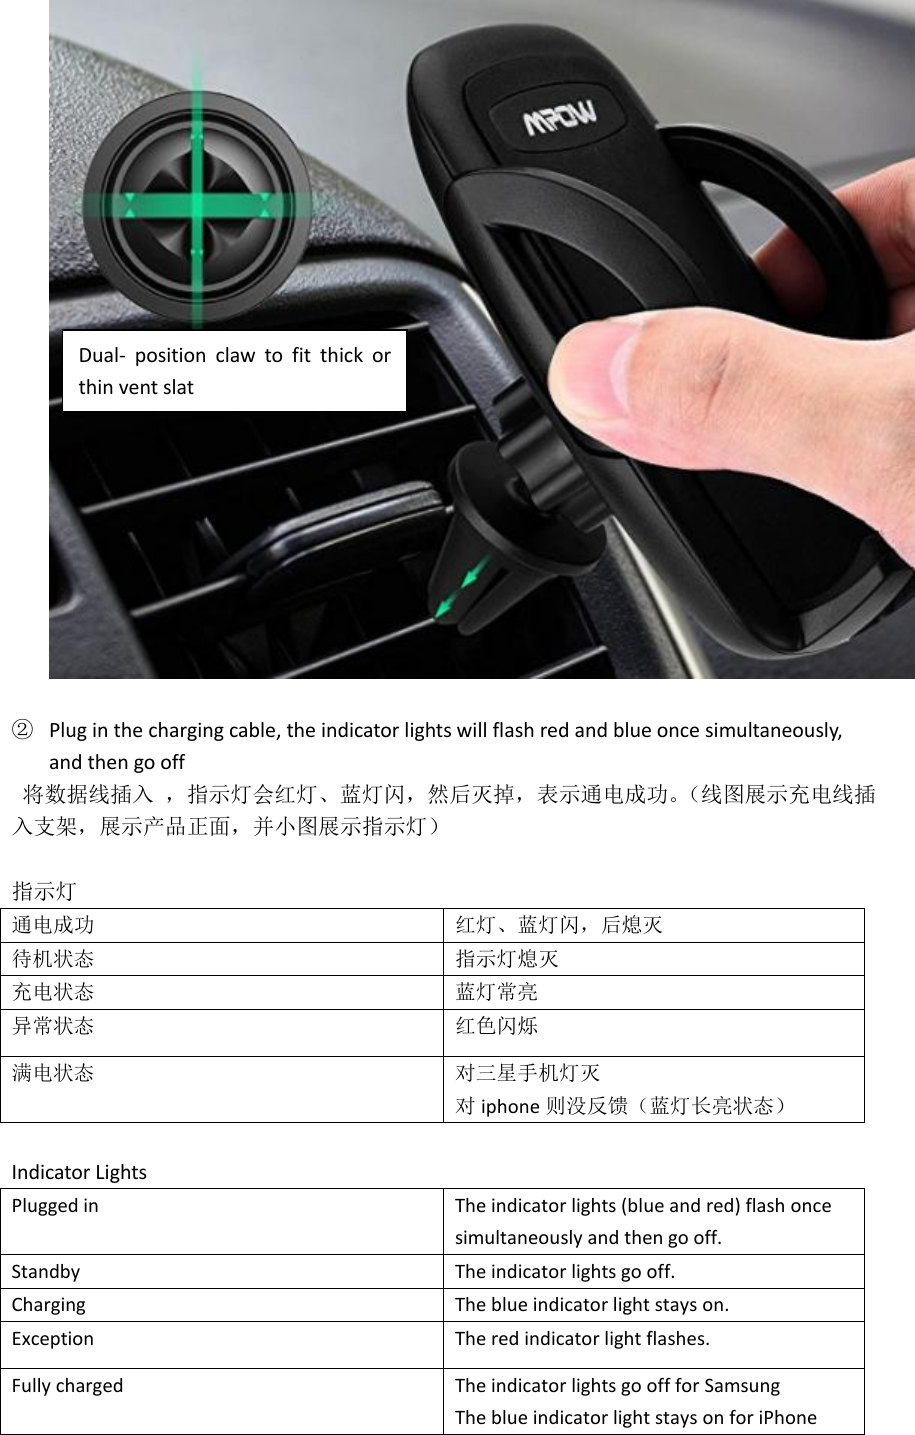   ② Plug in the charging cable, the indicator lights will flash red and blue once simultaneously, and then go off 将数据线插入 ，指示灯会红灯、蓝灯闪，然后灭掉，表示通电成功。（线图展示充电线插入支架，展示产品正面，并小图展示指示灯）  指示灯 通电成功 红灯、蓝灯闪，后熄灭 待机状态 指示灯熄灭 充电状态   蓝灯常亮 异常状态 红色闪烁 满电状态 对三星手机灯灭 对iphone 则没反馈（蓝灯长亮状态）  Indicator Lights Plugged in The indicator lights (blue and red) flash once simultaneously and then go off. Standby   The indicator lights go off. Charging   The blue indicator light stays on. Exception The red indicator light flashes. Fully charged The indicator lights go off for Samsung The blue indicator light stays on for iPhone Dual-  position  claw  to  fit  thick  or thin vent slat 